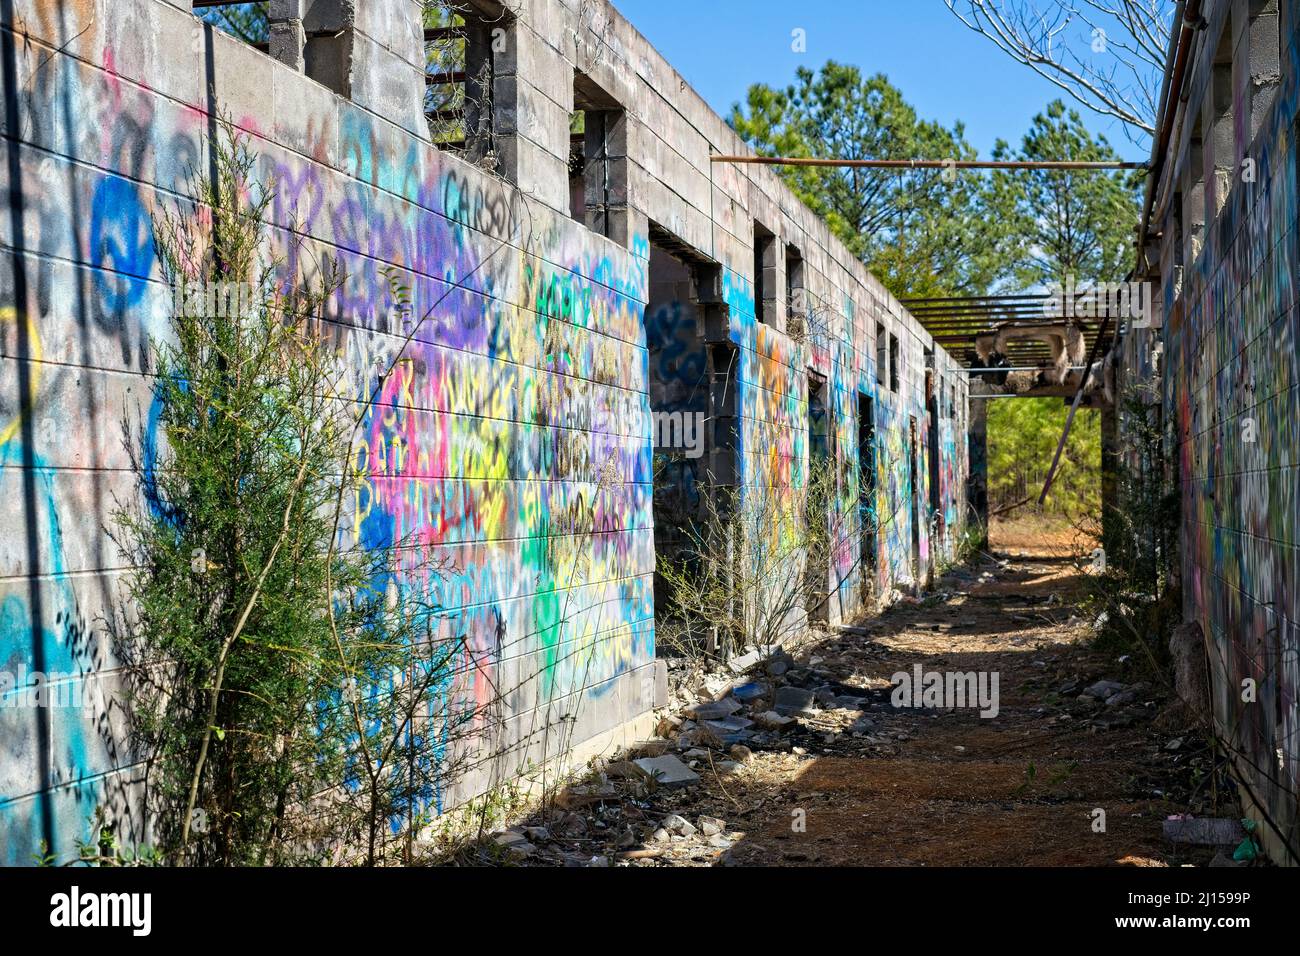 The Ad Hanna school was started in the 1960's for unruly students in Alabama, but now the ruins are covered in graffiti and left to nature. Stock Photo